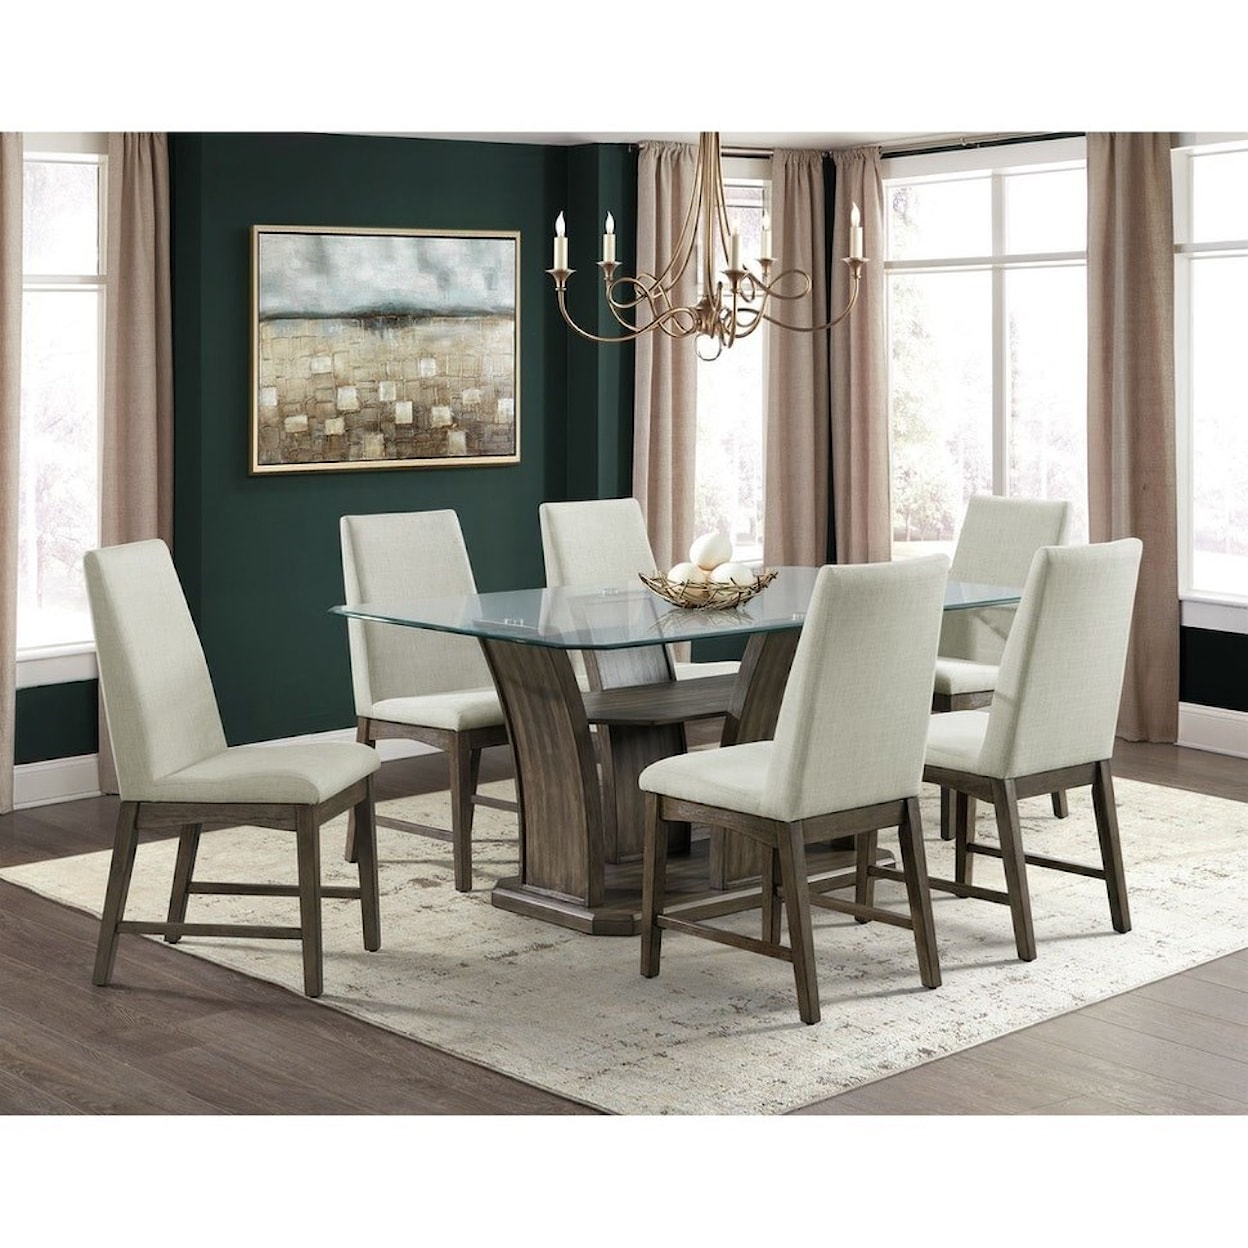 Elements Dapper 7-Piece Table and Chair Set